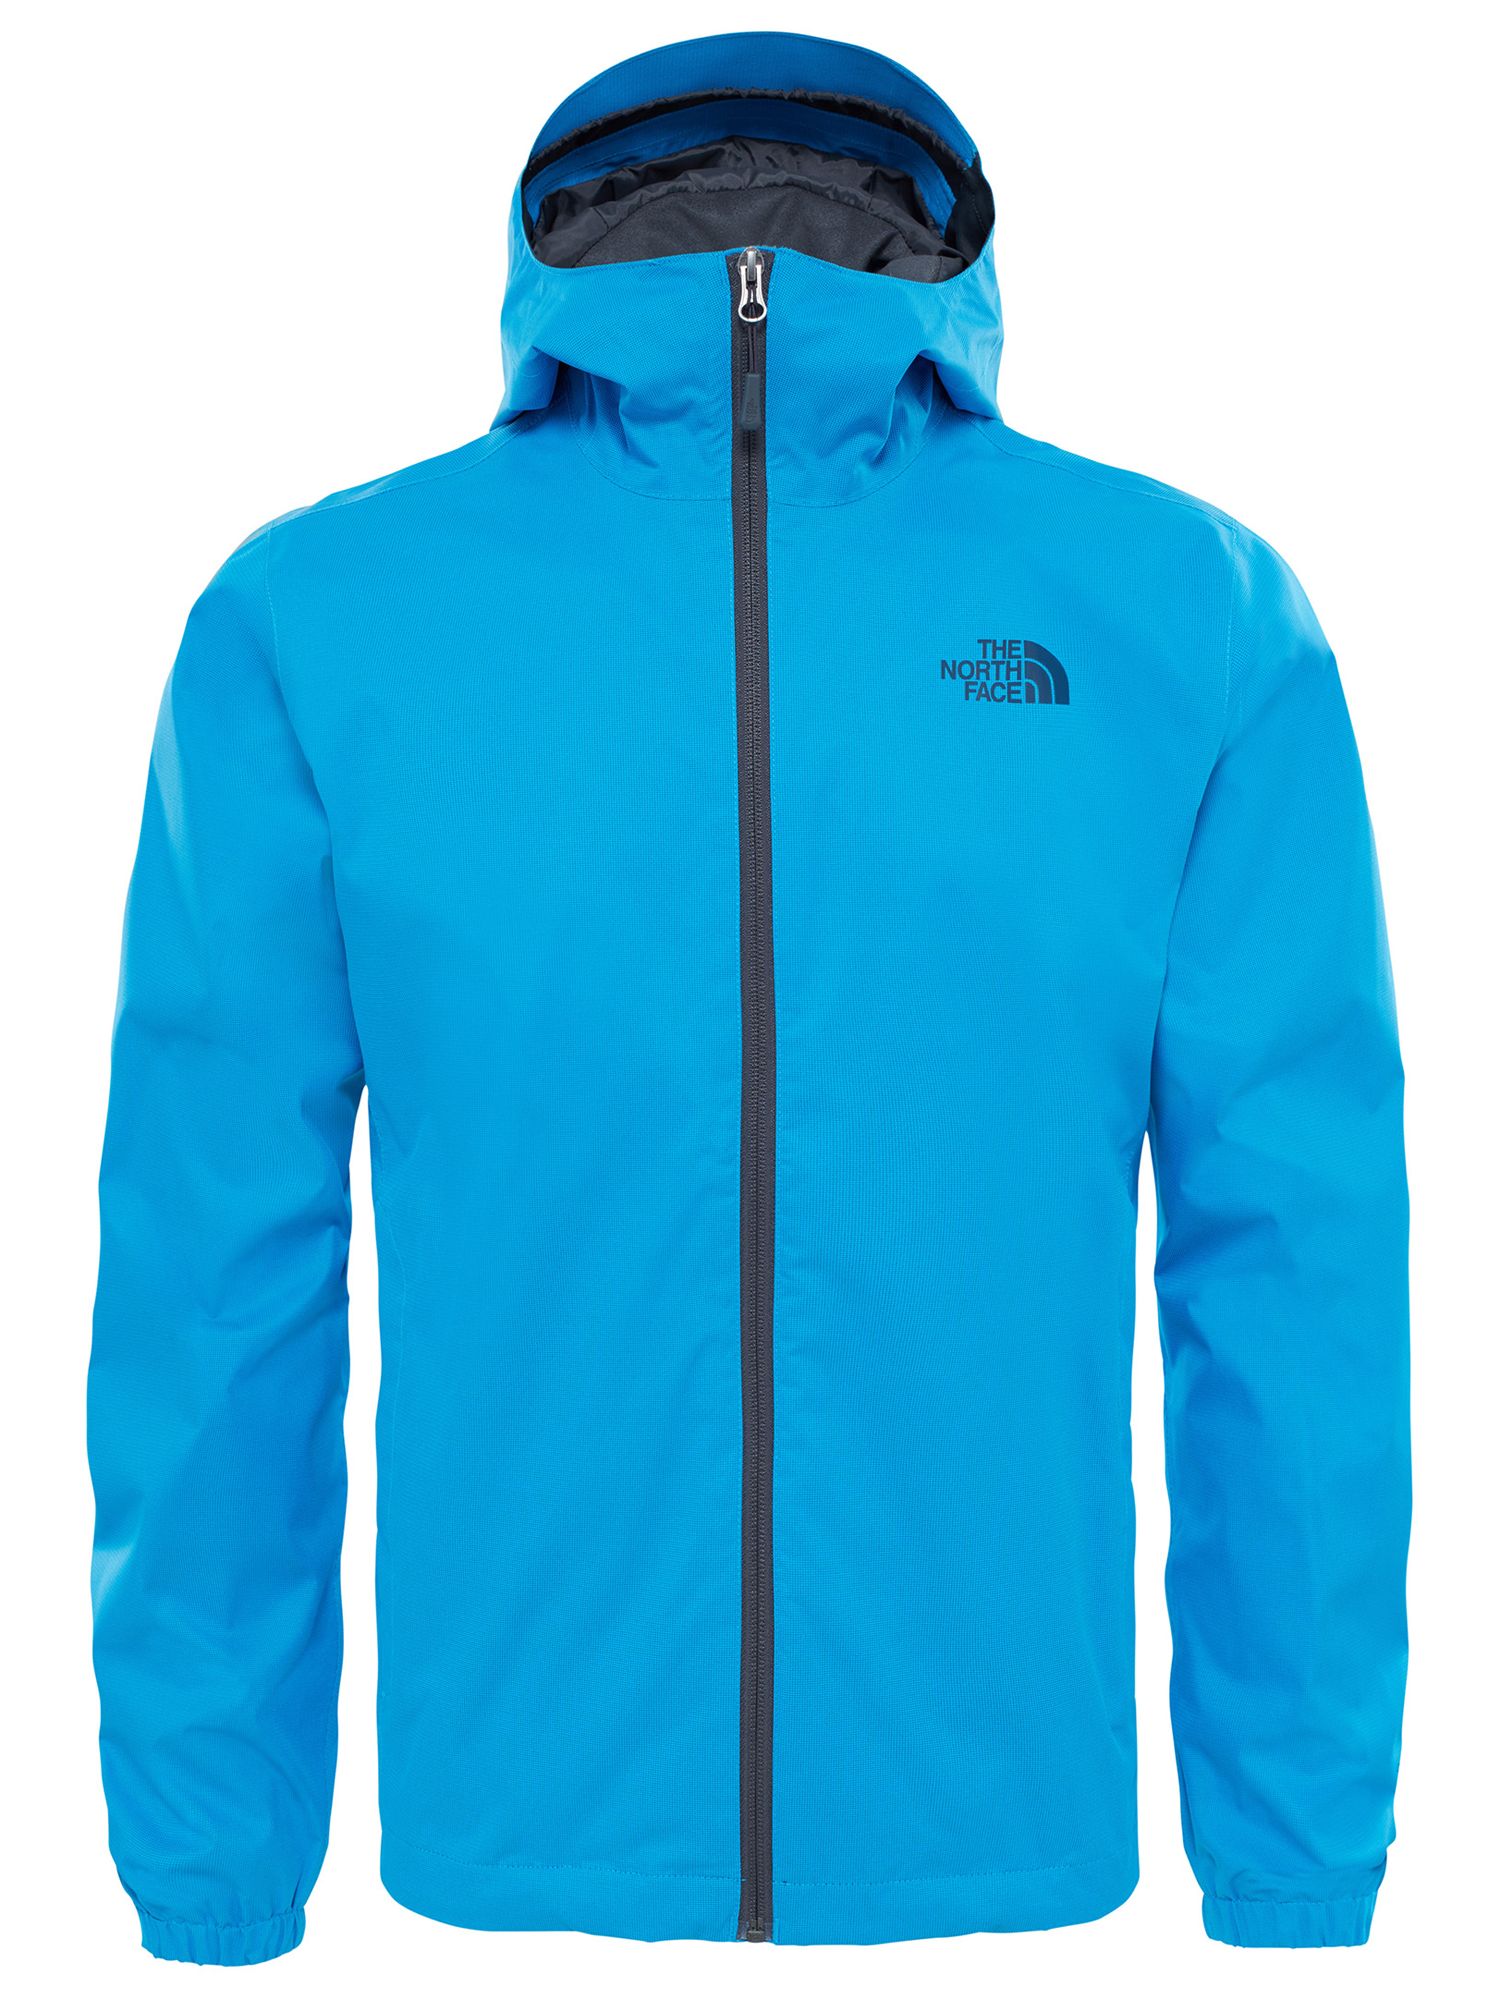 The North Face Quest Men's Waterproof Jacket, Blue at John Lewis & Partners